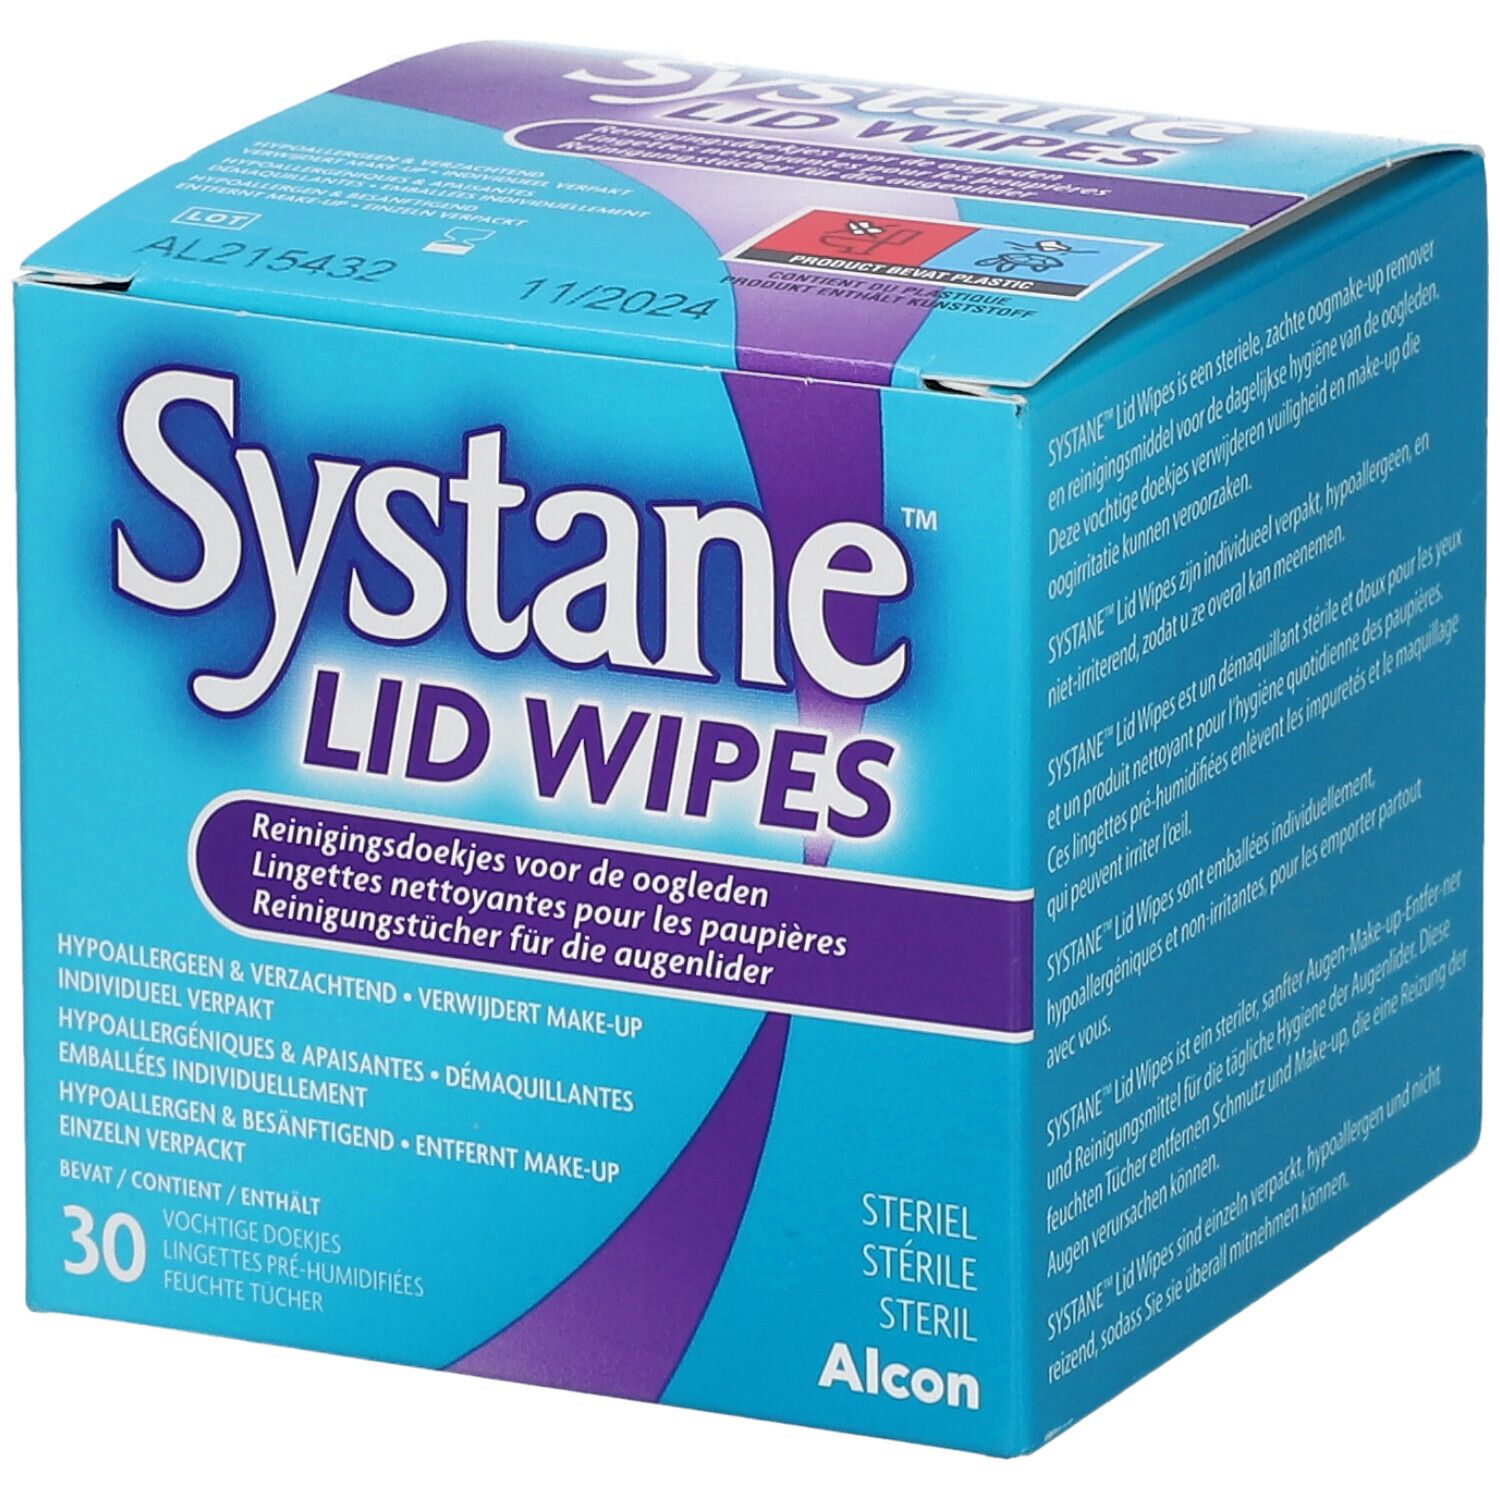 Image of Systane® Lid Wipes Steril